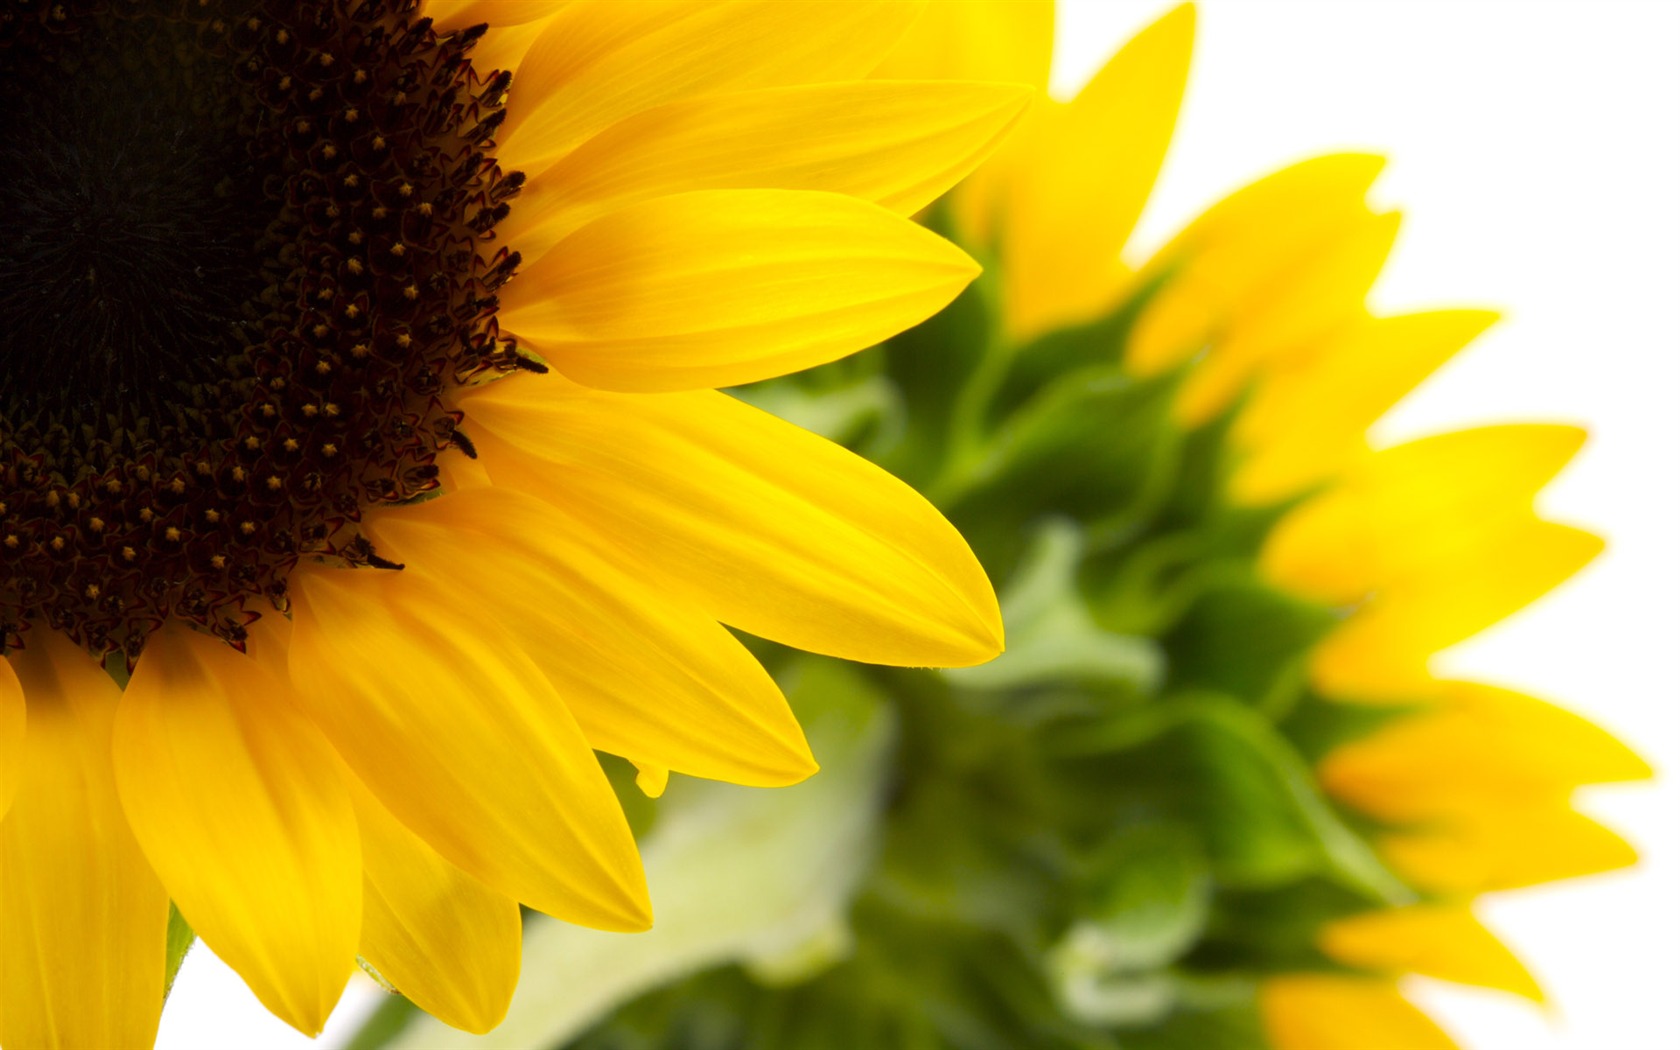 Sunny sunflower photo HD Wallpapers #26 - 1680x1050